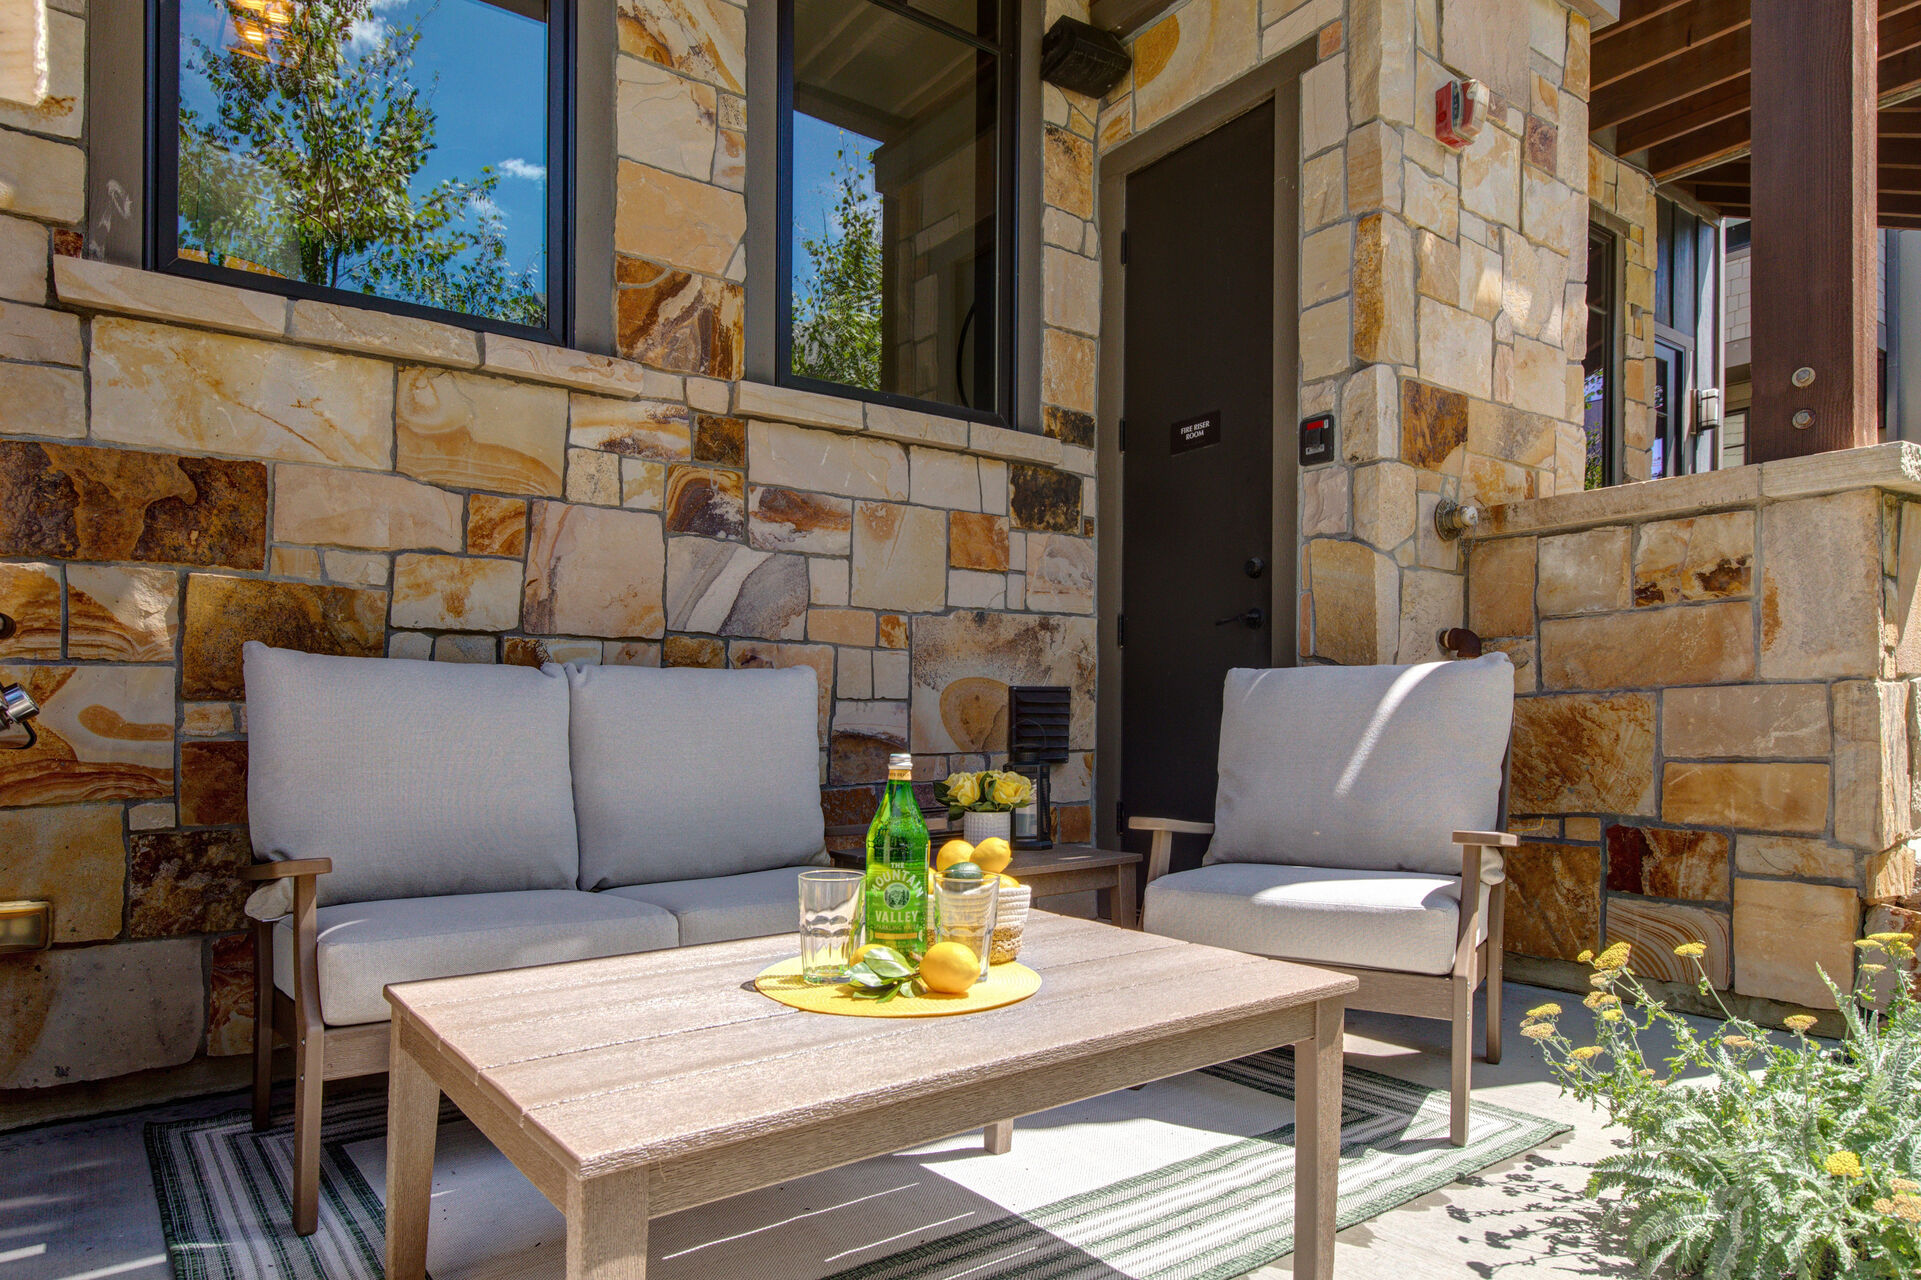 Private Patio with gas Weber grill and beautiful outdoor furnishings